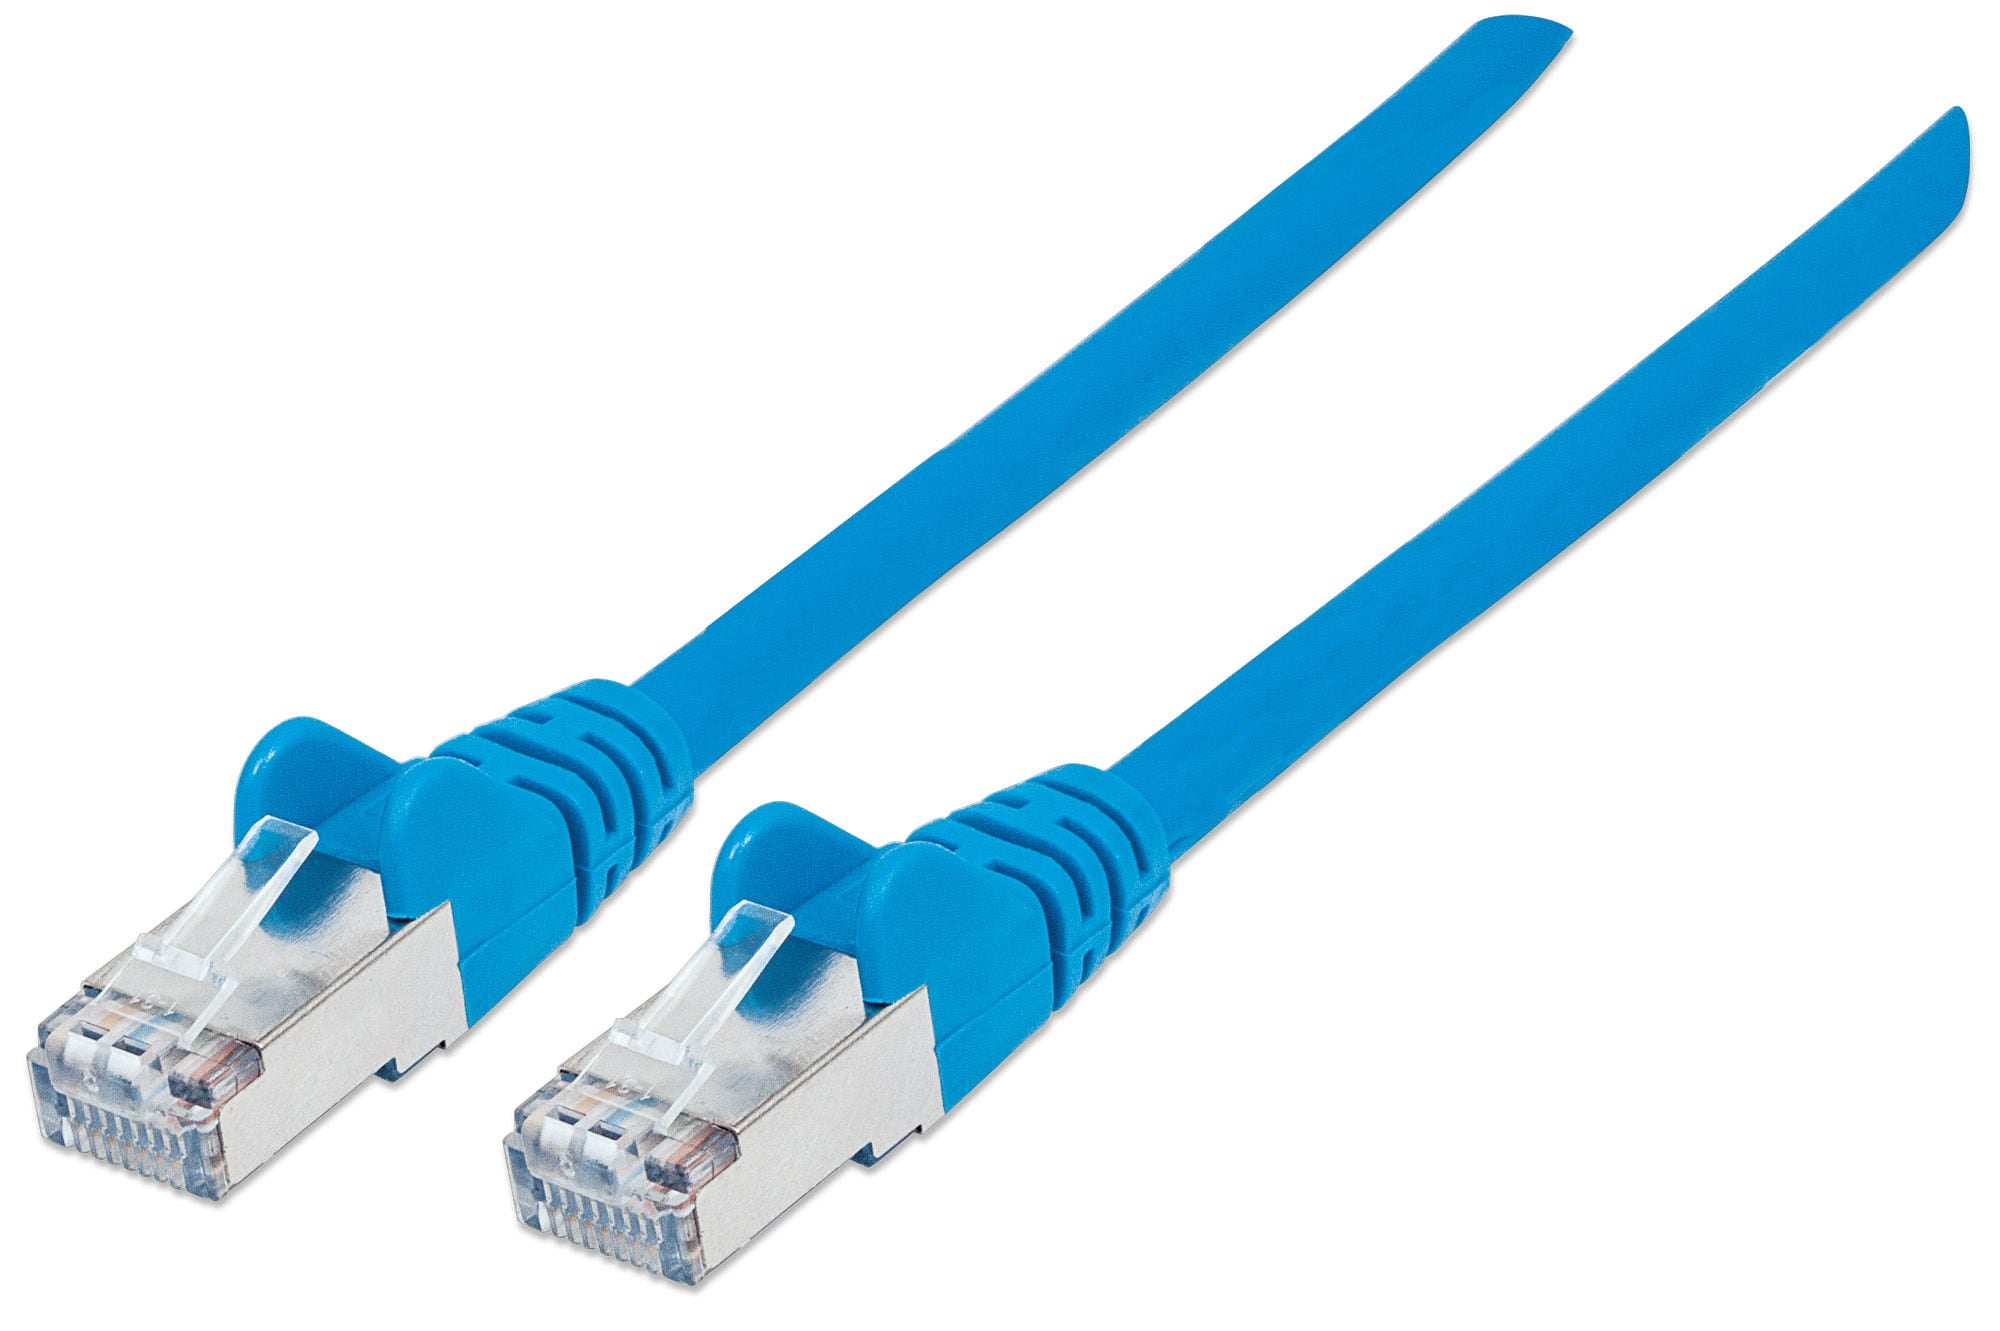 Intellinet Network Patch Cable, Cat6, 2m, Blue, Copper, S/FTP, LSOH / LSZH, PVC, RJ45, Gold Plated Contacts, Snagless, Booted, Lifetime Warranty, Polybag